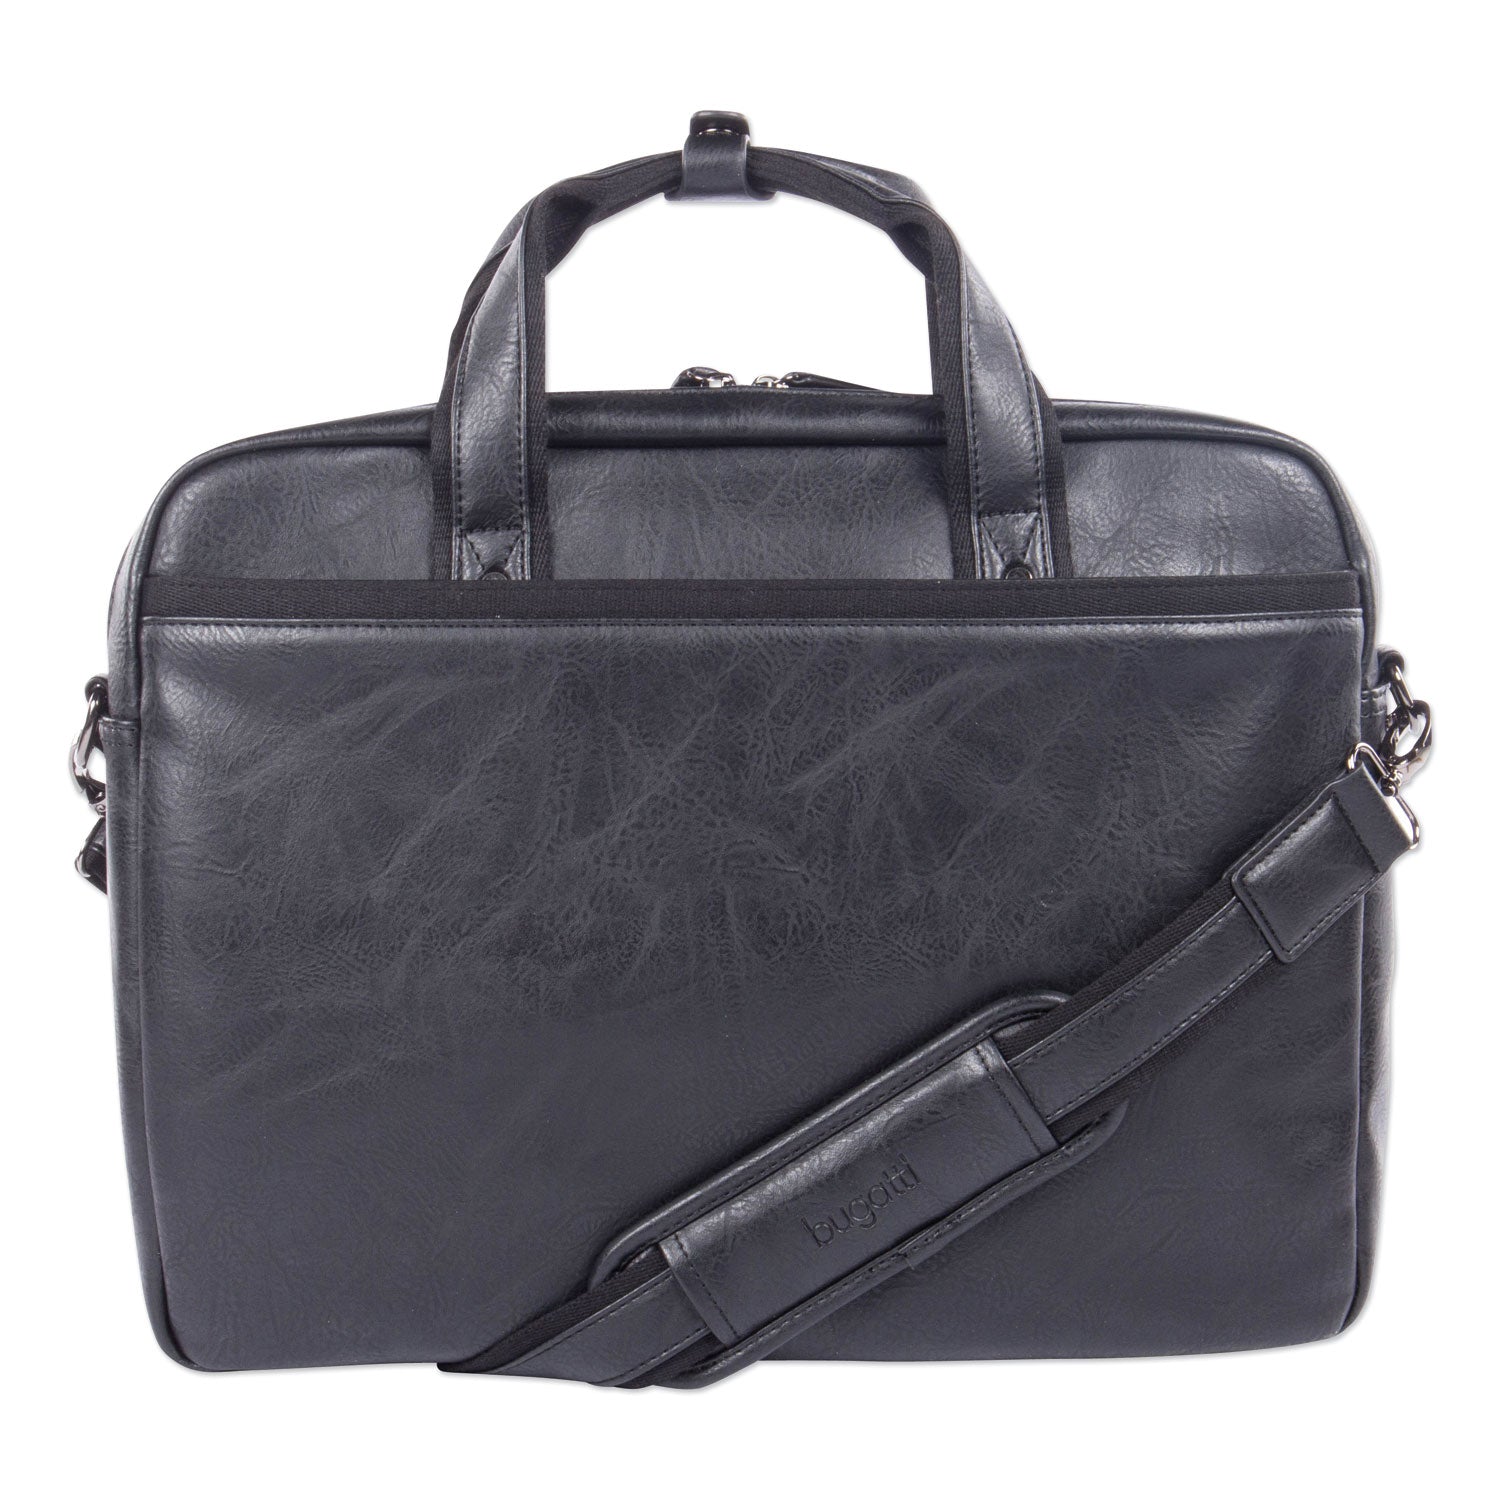 valais-executive-briefcase-fits-devices-up-to-156-leather-475-x-475-x-115-black_swzexb532smbk - 3